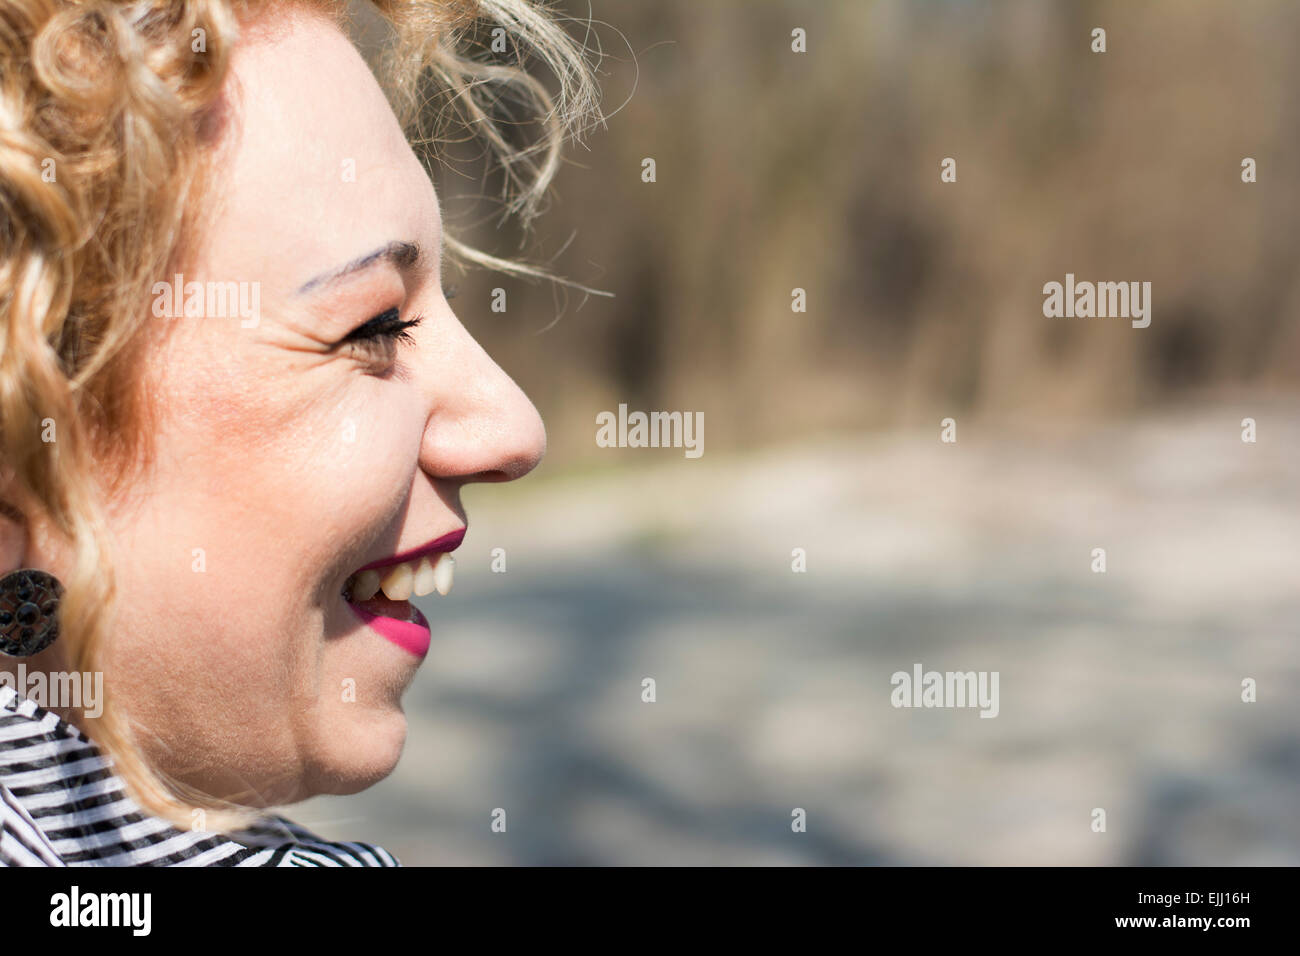 Closeup portrait of a pretty young woman with blond curly hair laughing out loud Stock Photo